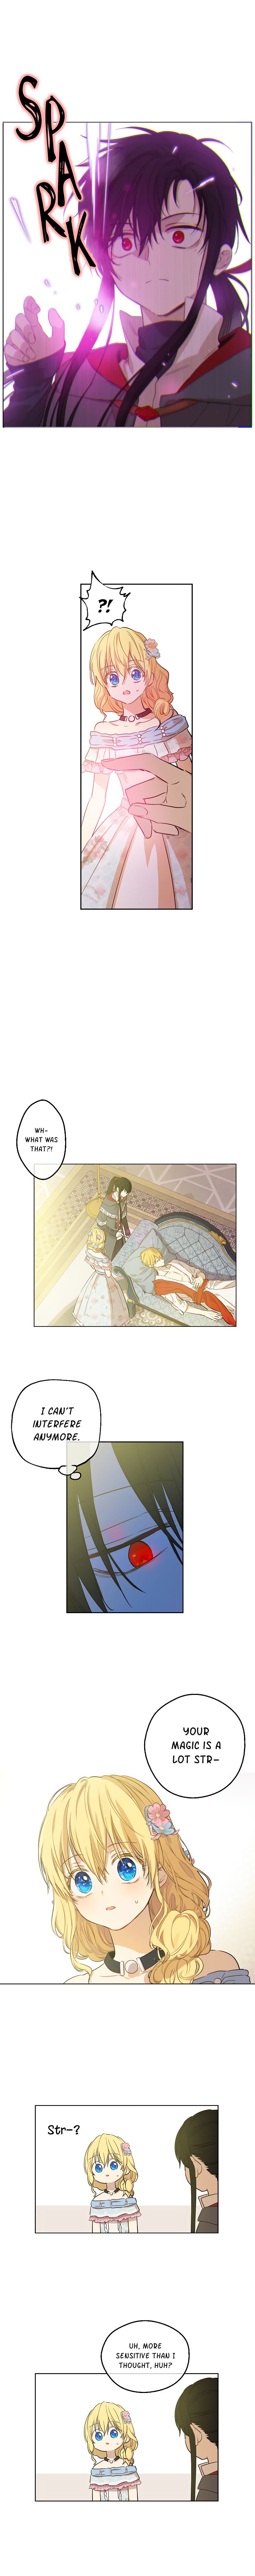 Suddenly Became A Princess One Day - chapter 70 - #3